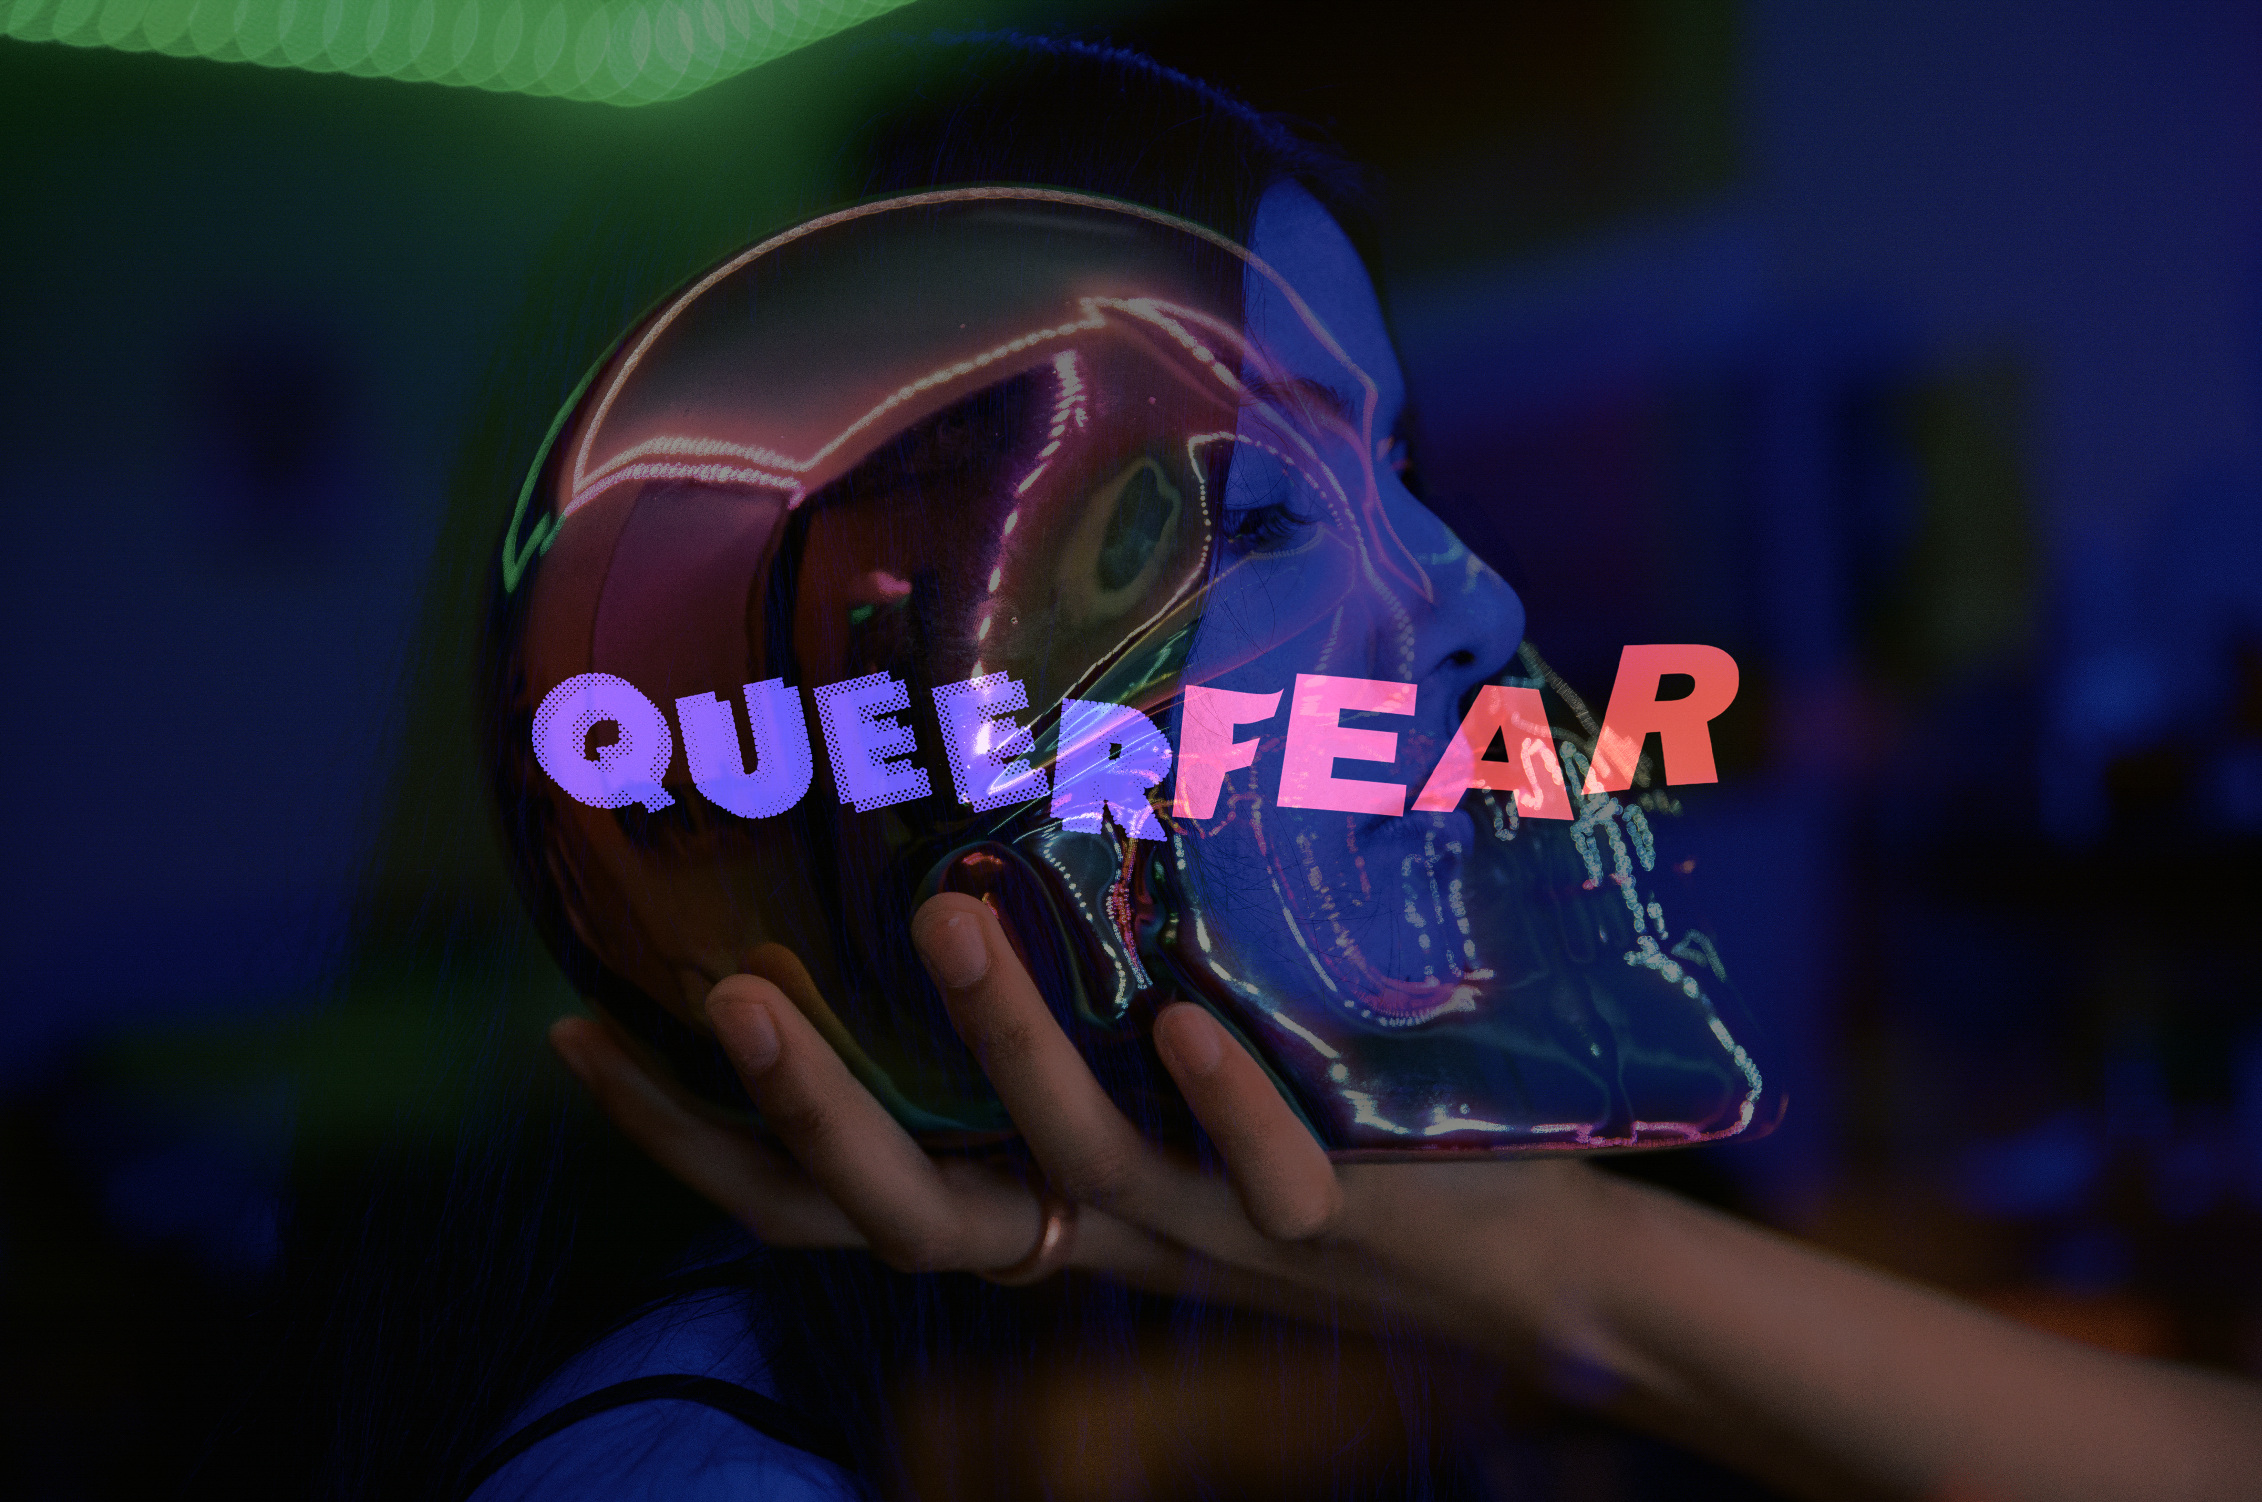 queer-fear-cover-squarespace-blog.png